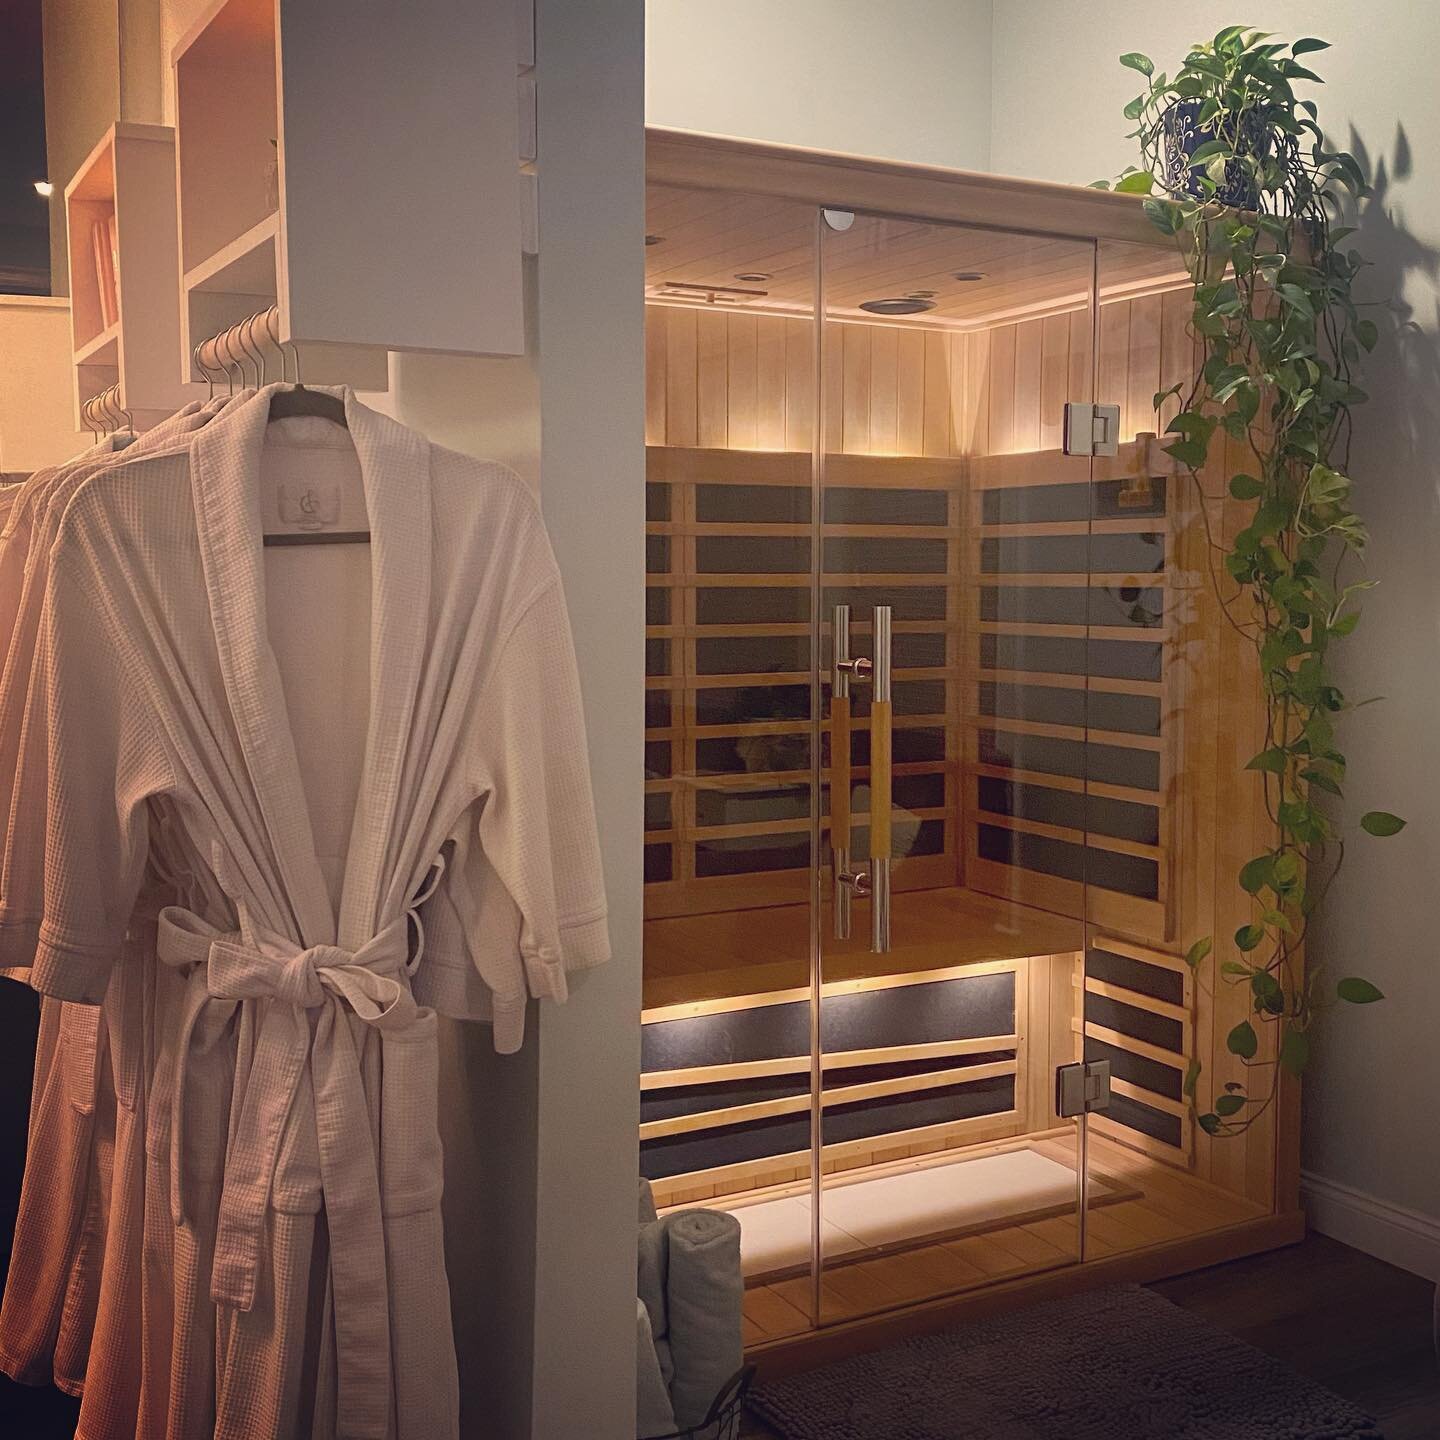 A warm robe &amp; hot sauna on a day like today, can you think of a better way to cozy up?